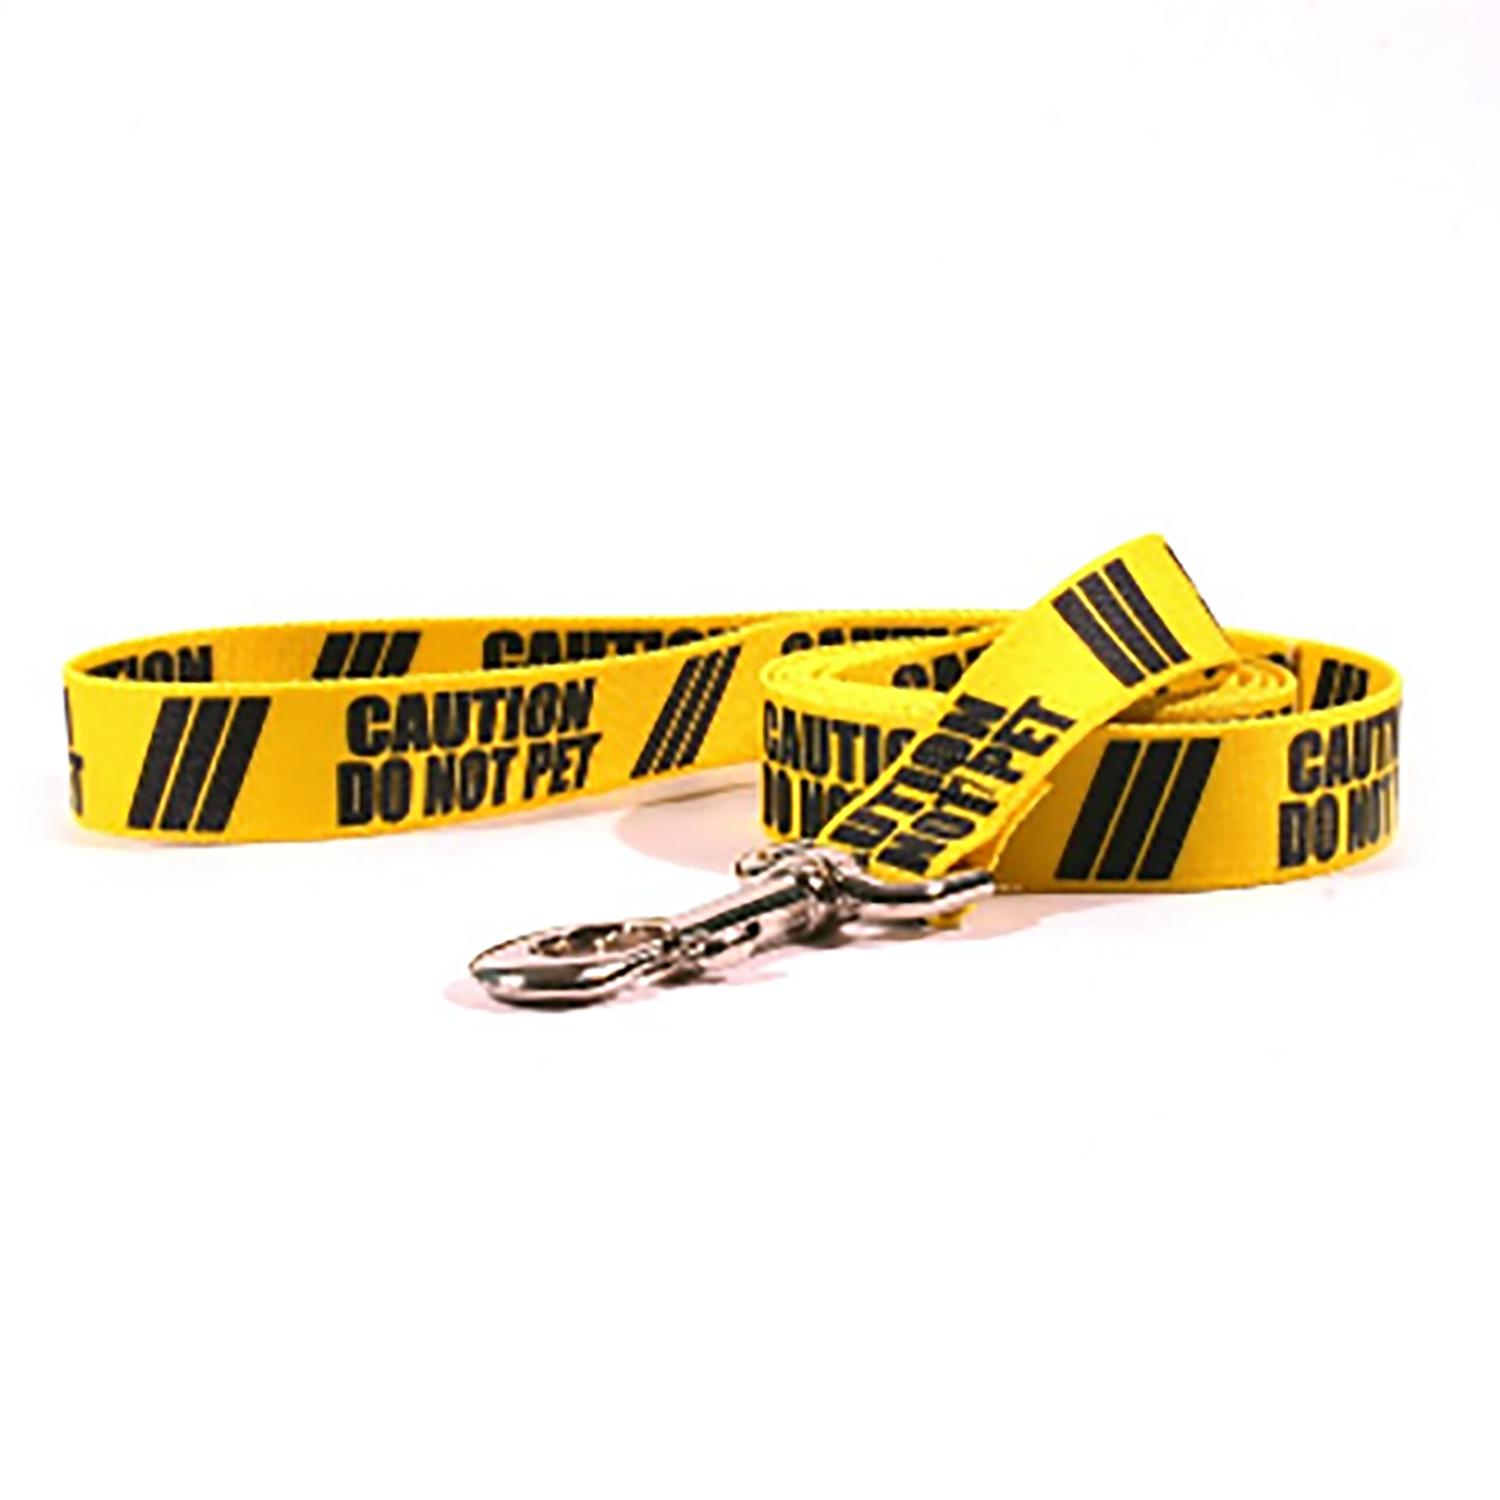 Caution Dog Leash by Yellow Dog - Do Not Pet